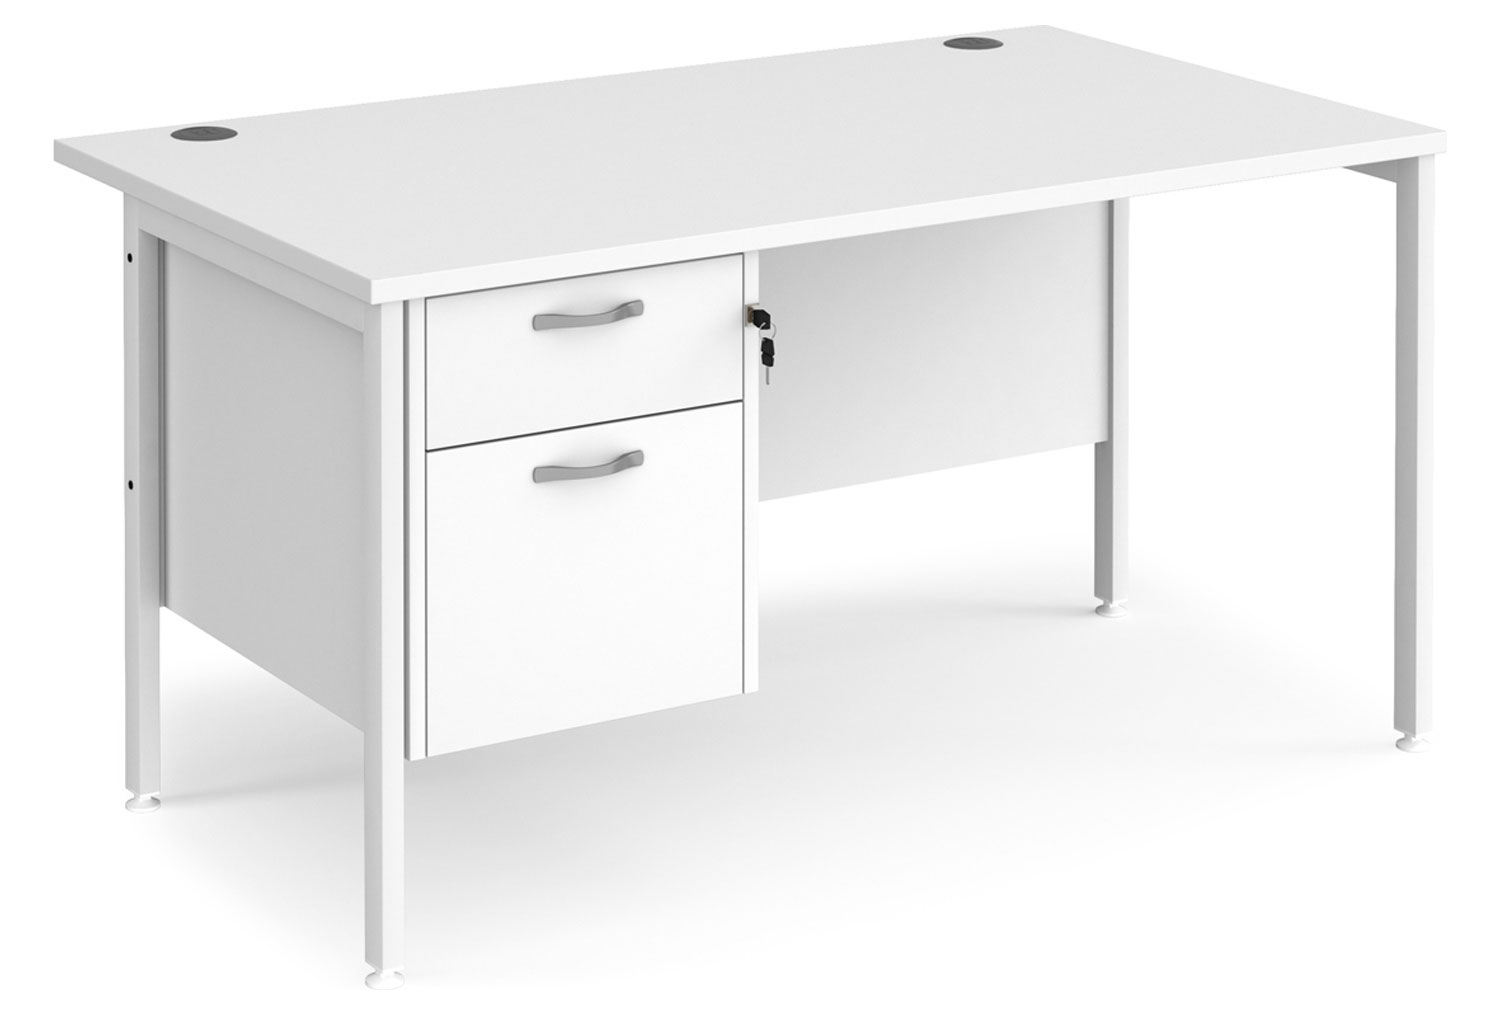 Value Line Deluxe H-Leg Rectangular Office Desk 2 Drawers (White Legs), 140wx80dx73h (cm), White, Express Delivery